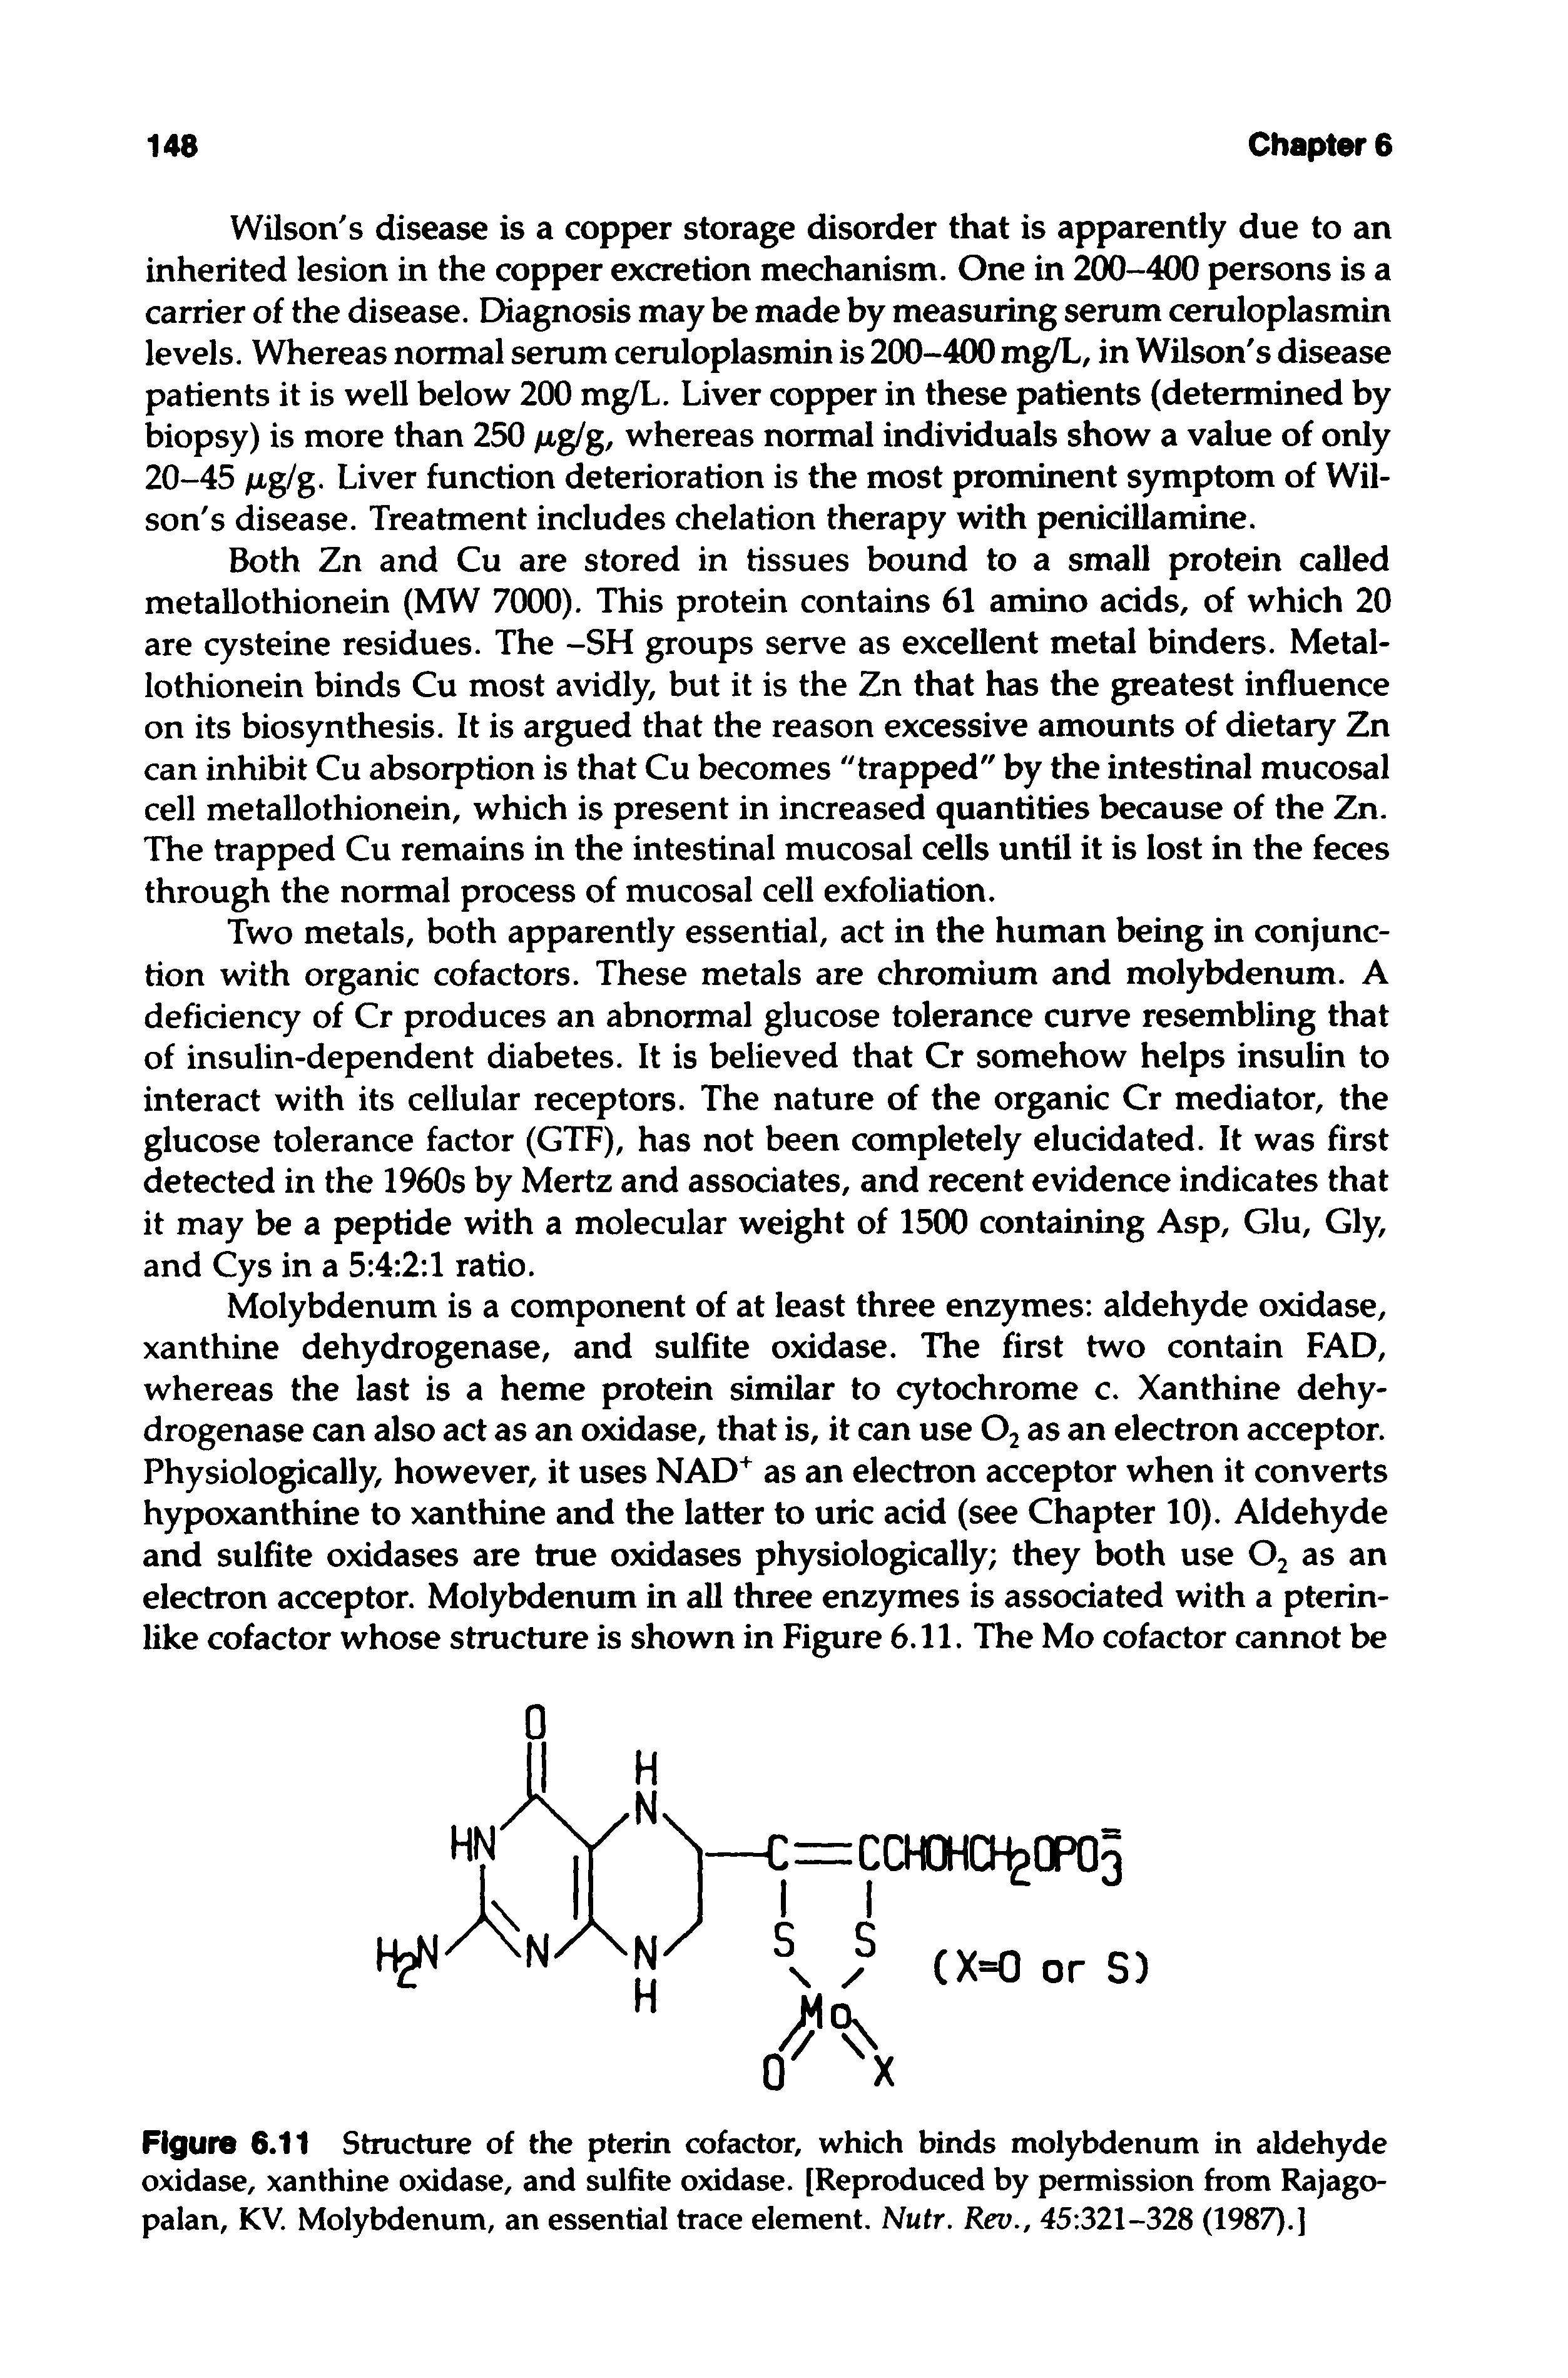 Figure 6.11 Structure of the pterin cofactor, which binds molybdenum in aldehyde oxidase, xanthine oxidase, and sulfite oxidase. [Reproduced by permission from Rajago-palan, KV. Molybdenum, an essential trace element. Nutr. Rev., 45 321-328 (1987).]...